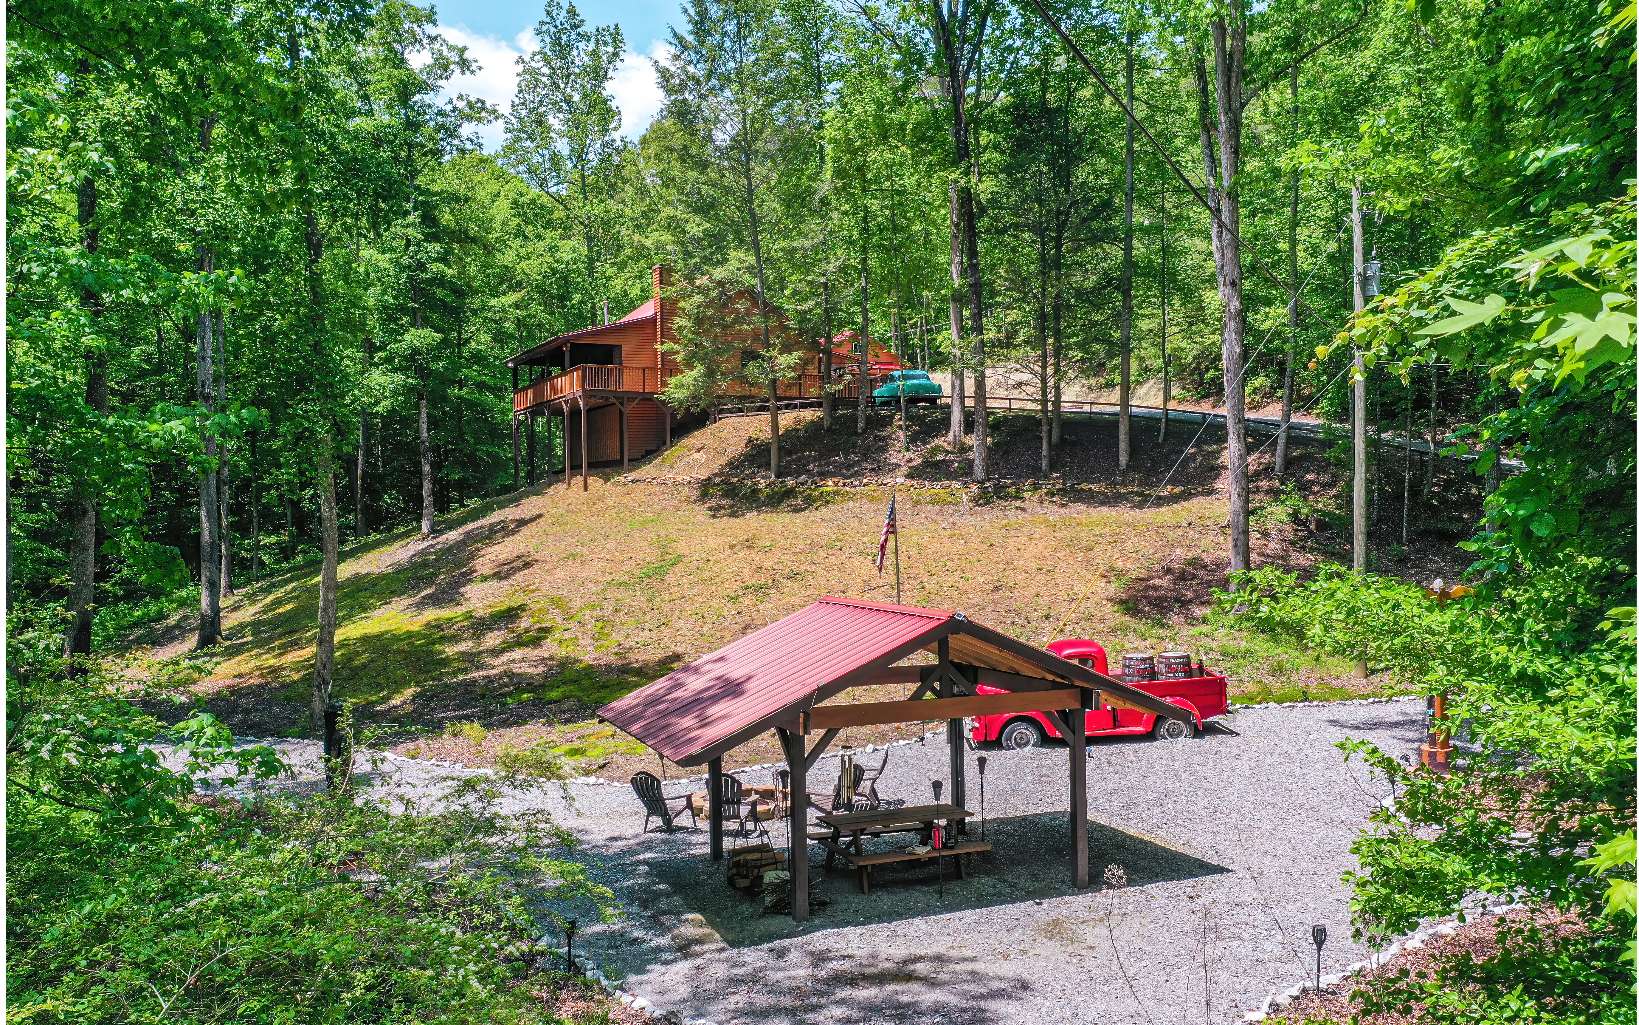 This incredible 2BR, 1BA quintessential rustic log-sided cabin home has 1,408 sq. ft. This rare gem resides on a tranquil 4.91AC w/ approx 1000 ft of noisy chattering stream frontage along 2 streams that converge on the property just below the front porch. It’s a very unique opportunity to own both sides of the stream in a very private setting where you don’t see a single neighbor yet so close to the towns of Ellijay & Blueridge. The gravel road is easy. This property was on a successful short-term rental program, netting $35K in 2020, $25K in 2021, & $10K in the 1st quarter of 2022 when it was removed from rental & is being sold completely turn-key. The interior is all tongue & groove wood. The bedrooms are very spacious. The master is on the main, & the kitchen was completely remodeled in 2022. The exterior is also very unique w/ a 1950 Cadillac & a 1950 Dodge pickup truck as yard art which welcomes you to the property & the pavilion. Both vehicles & the totem pole are included w/ the property. The pavilion has an 8-foot-wide fire pit & a gravel path that leads to the spot where the two streams converge. The decks are also wrap-around w/ an incredible view of the stream & property. The Seller's upgrades include adding a balcony to the upstairs bedroom, a charcoal water purification system, the pavilion, & a 4-car 760 sq. ft. barn/garage/workshop/game room that’s heated w/ a cast iron stove. THE VIRTUAL TOUR VIDEO IS A MUST SEE!